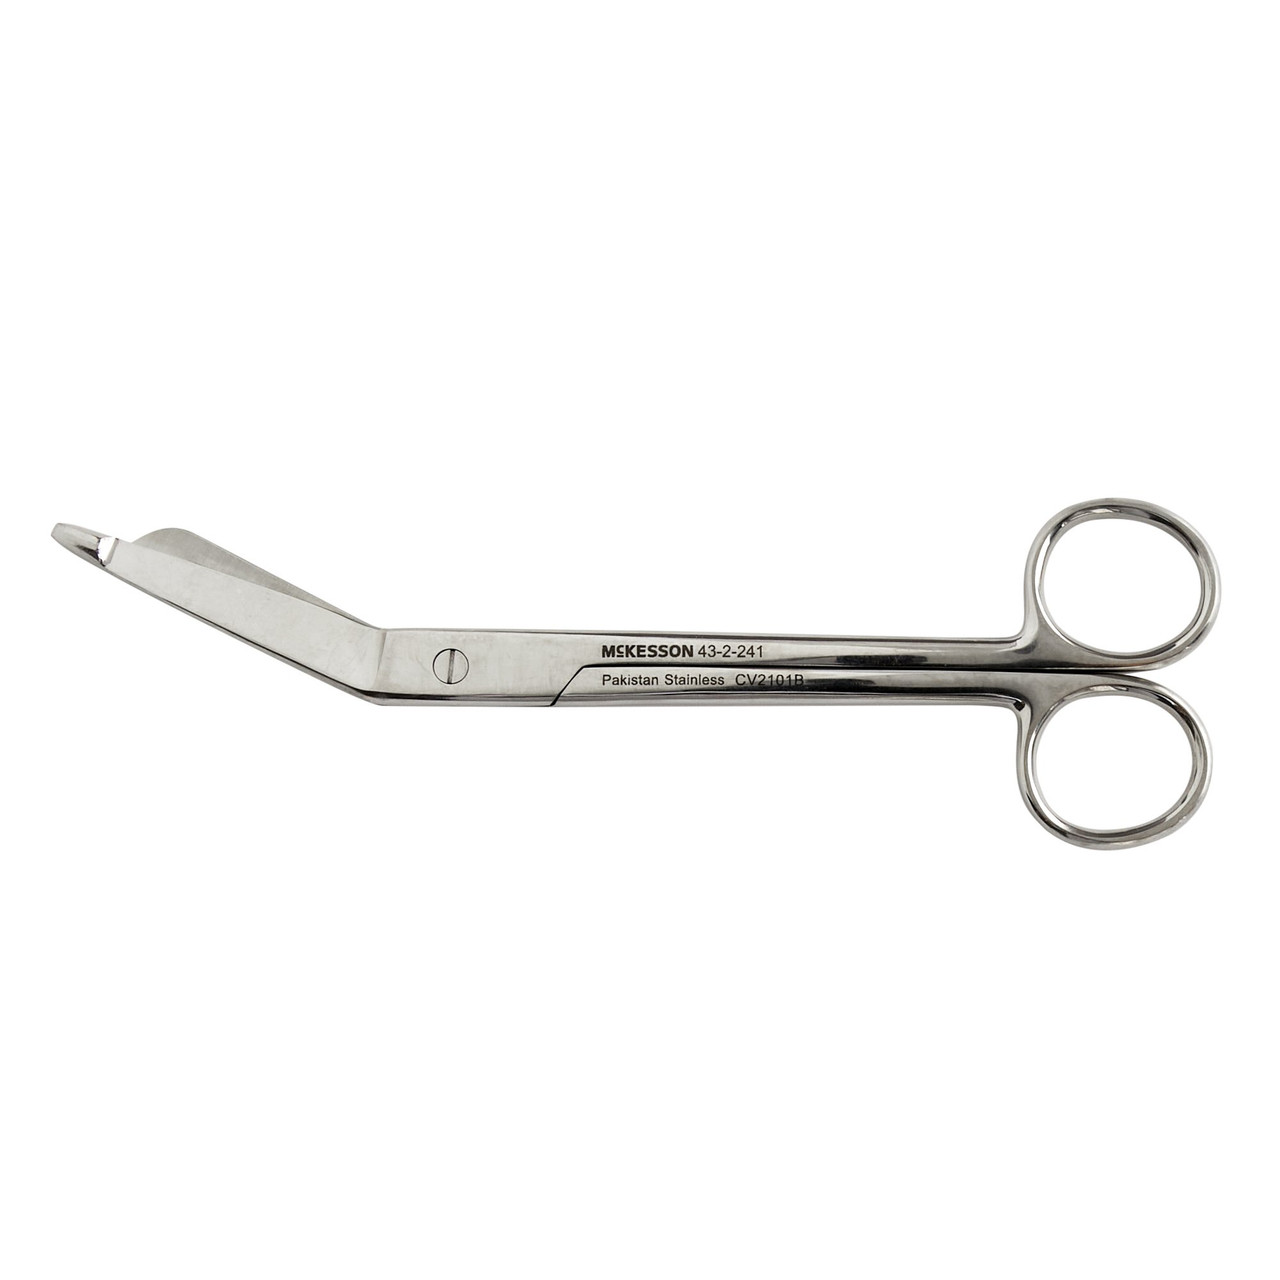 McKesson Utility Scissors/Shears, Office Grade, Stainless Steel/Plastic,  Blunt Tip, 7 1/4 in, 10 Count